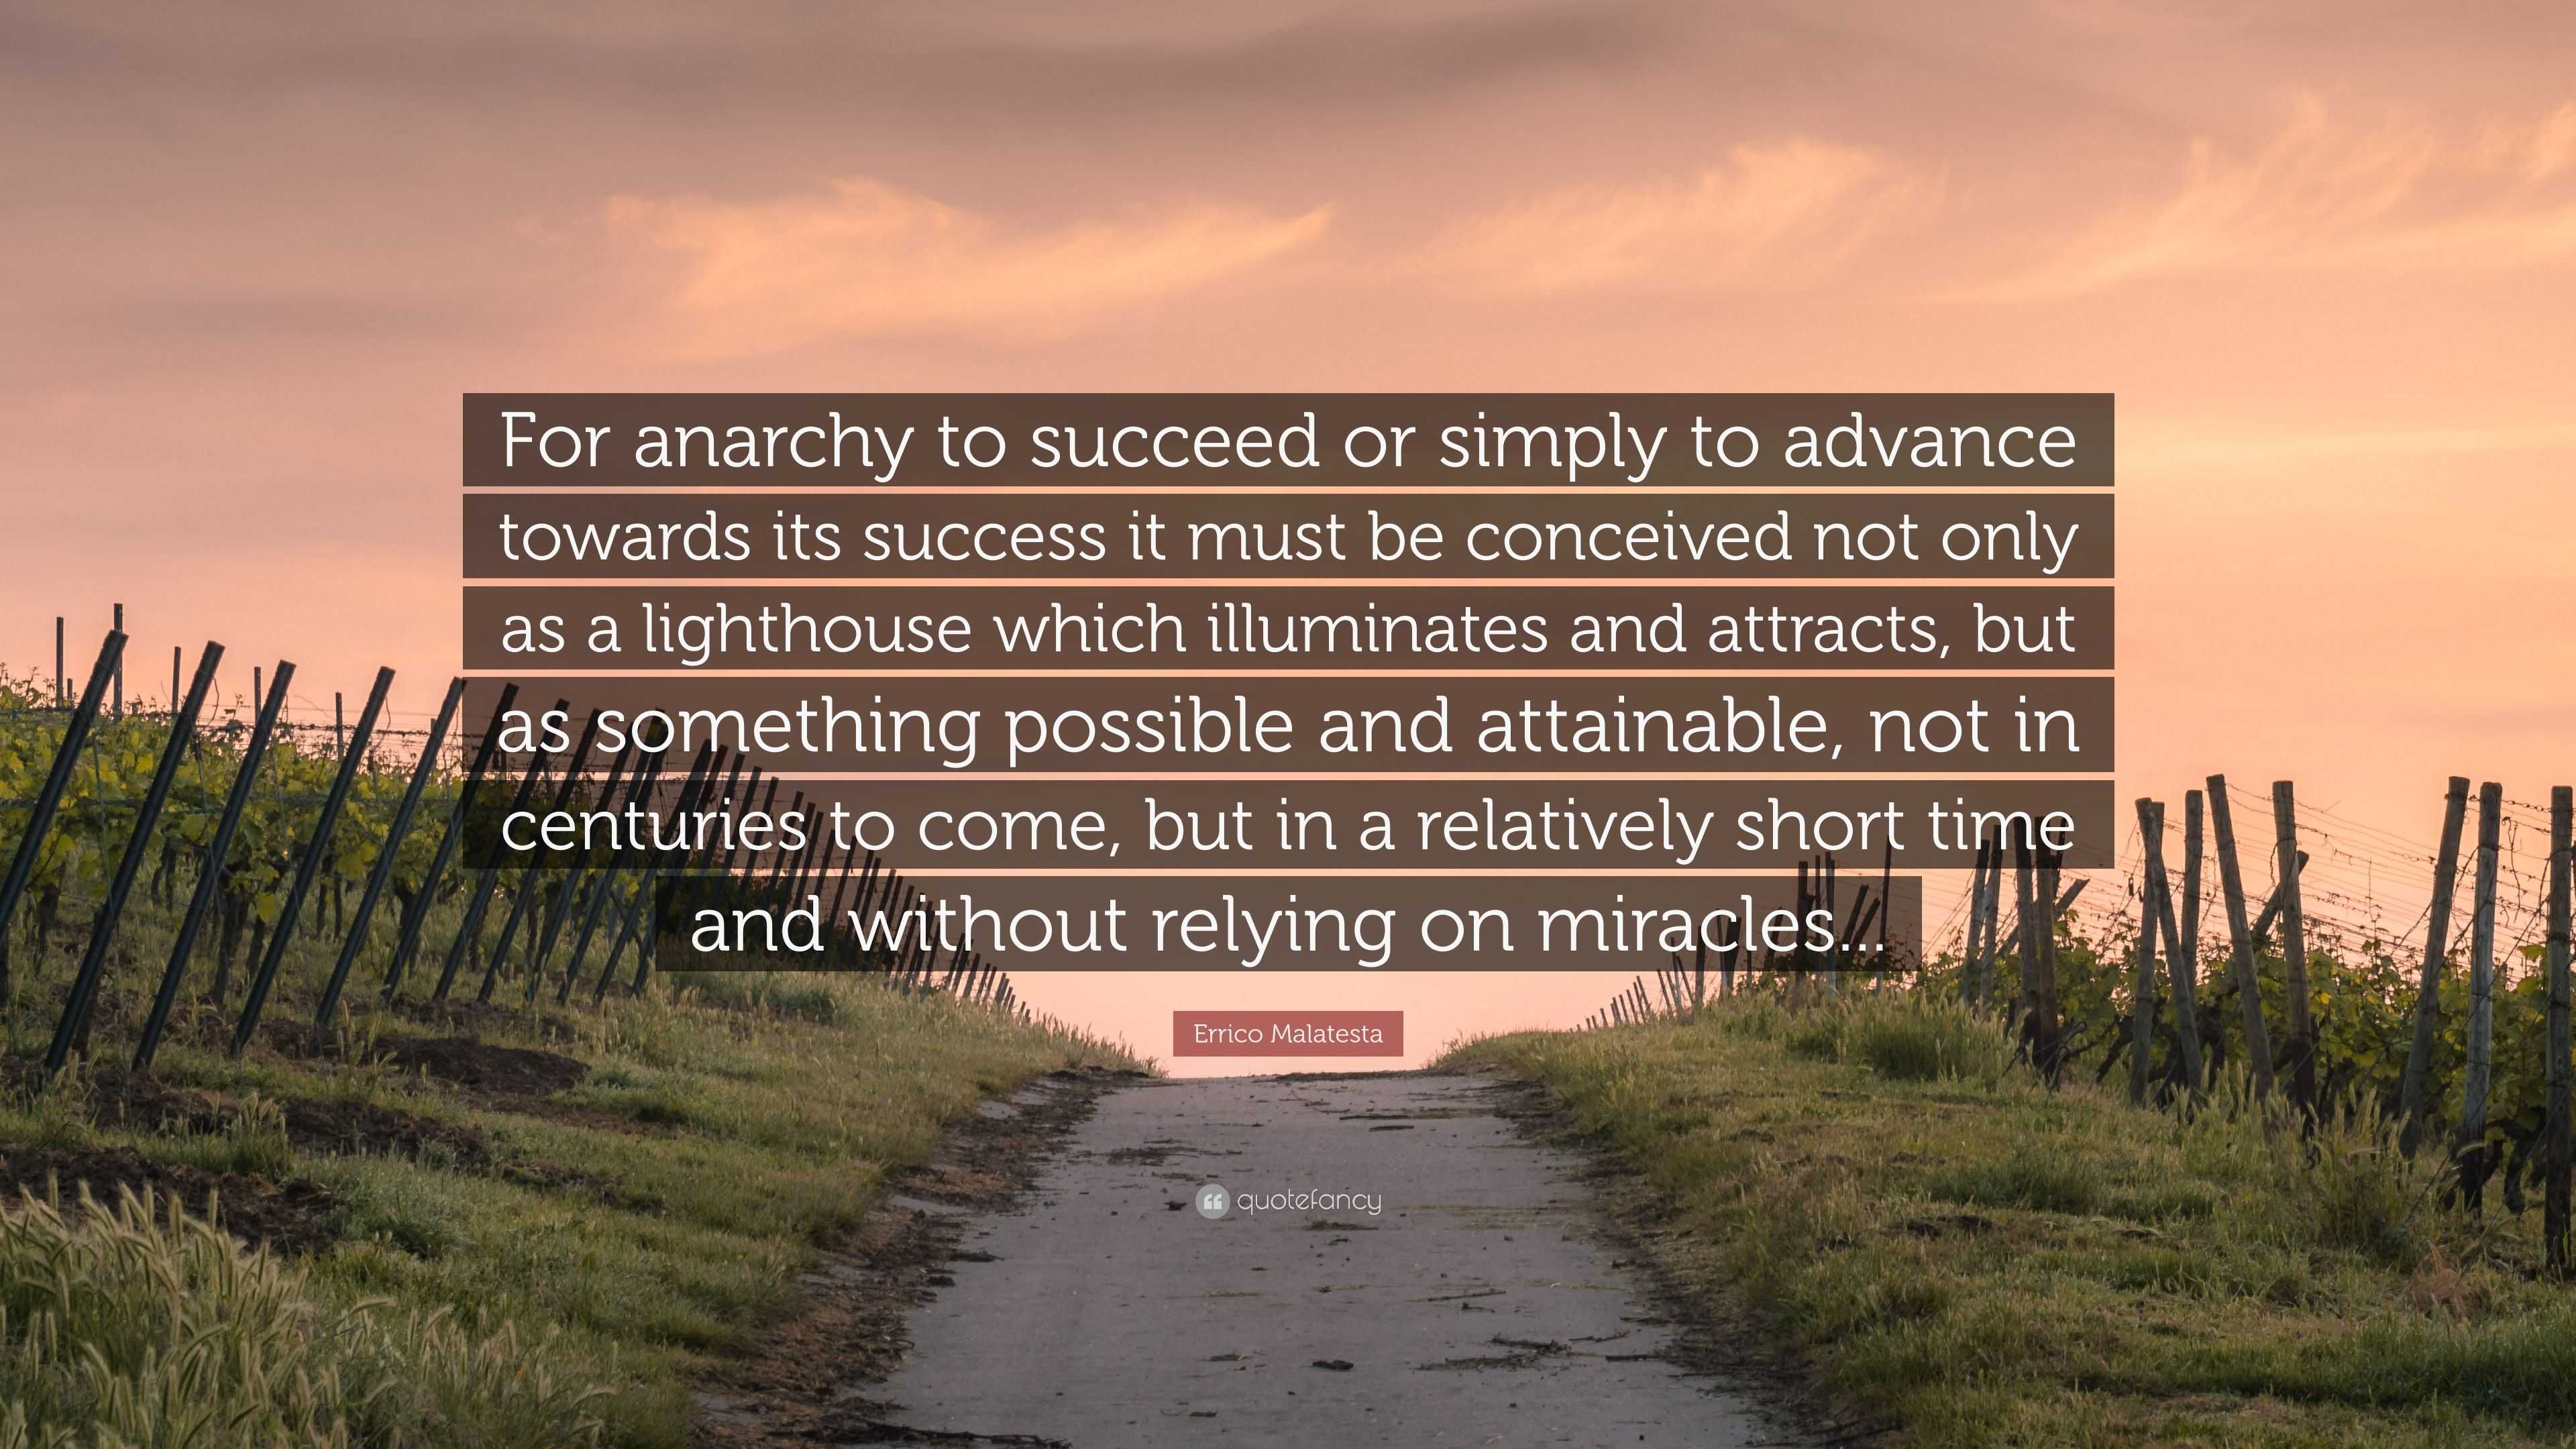 Errico Malatesta Quote: “For anarchy to succeed or simply to advance ...